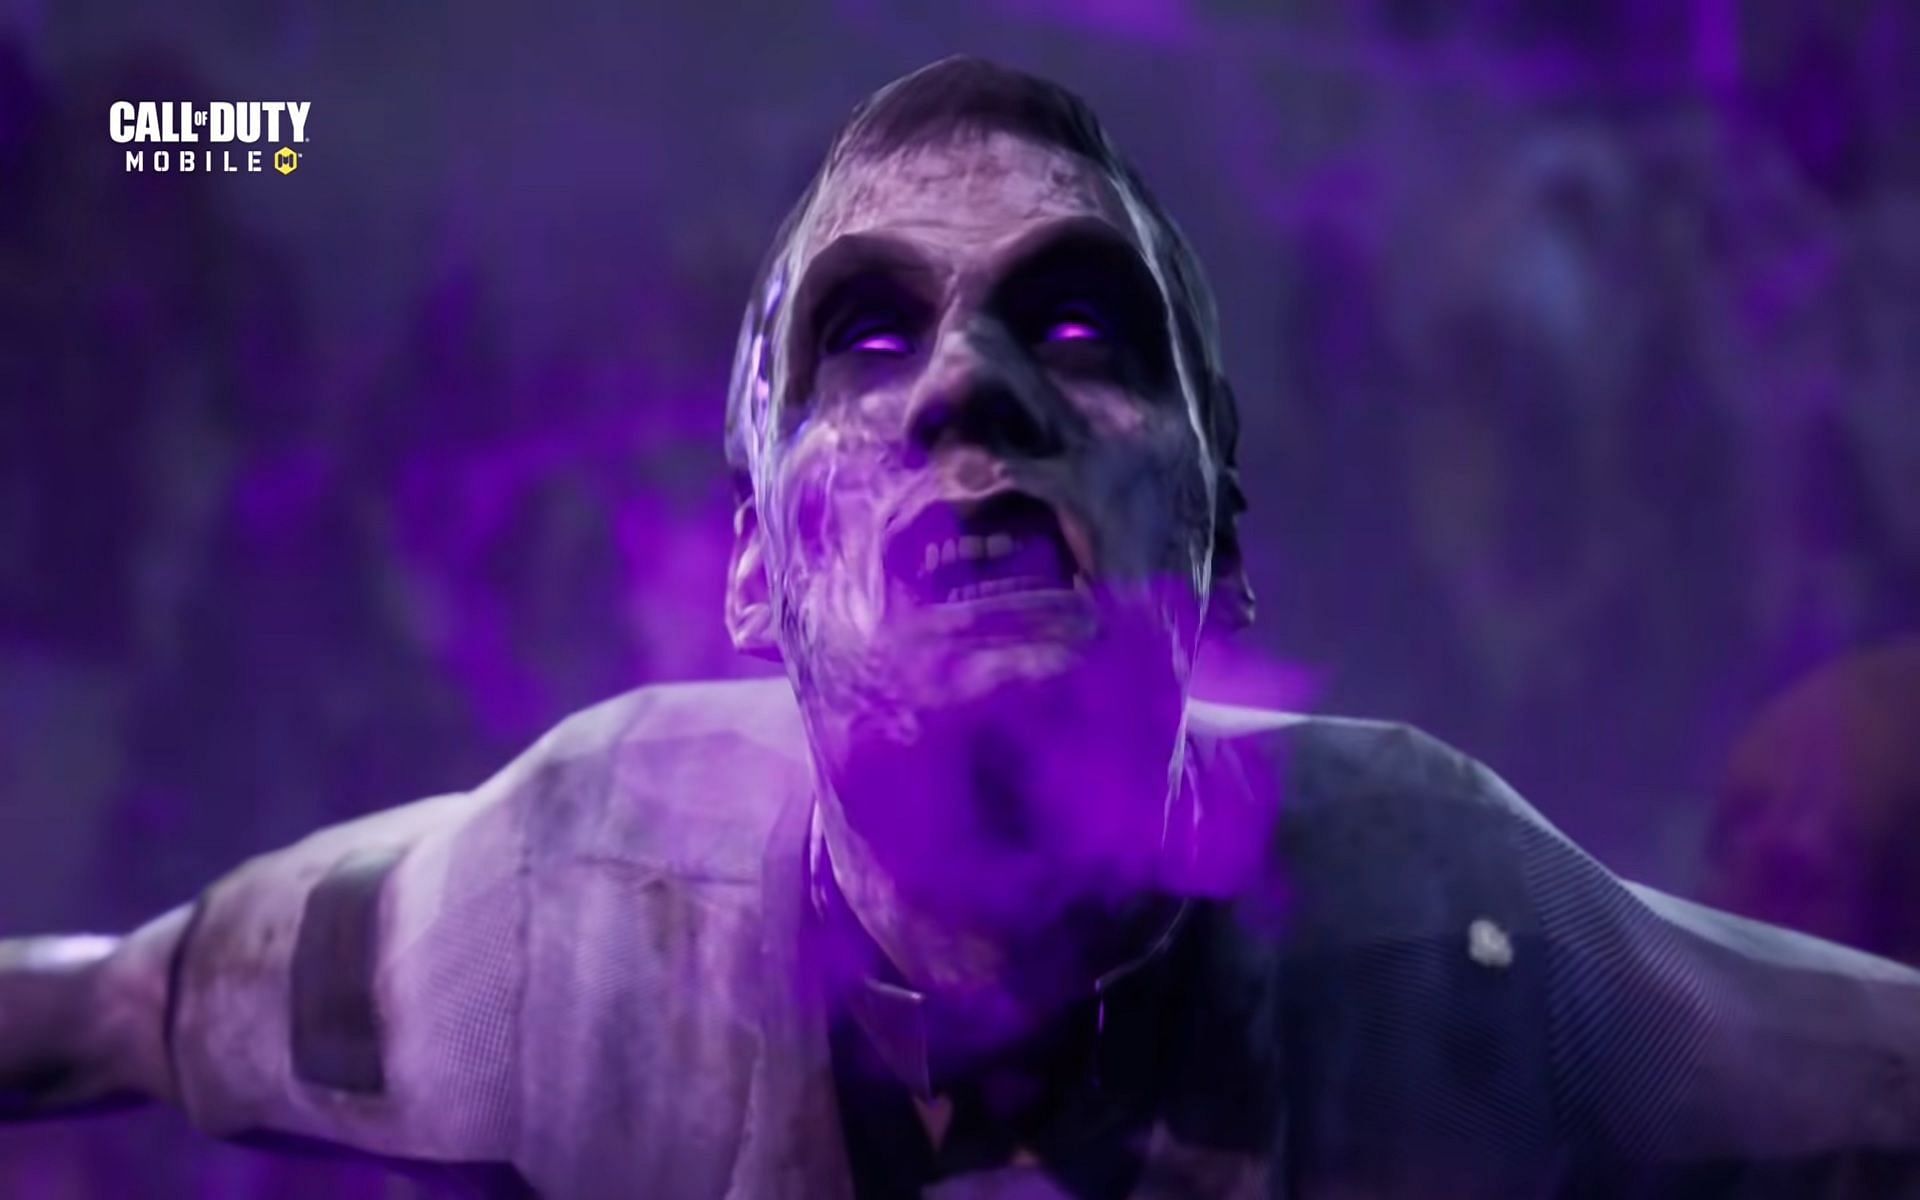 The zombie threat in Undead Siege (Image via Activision Blizzard)